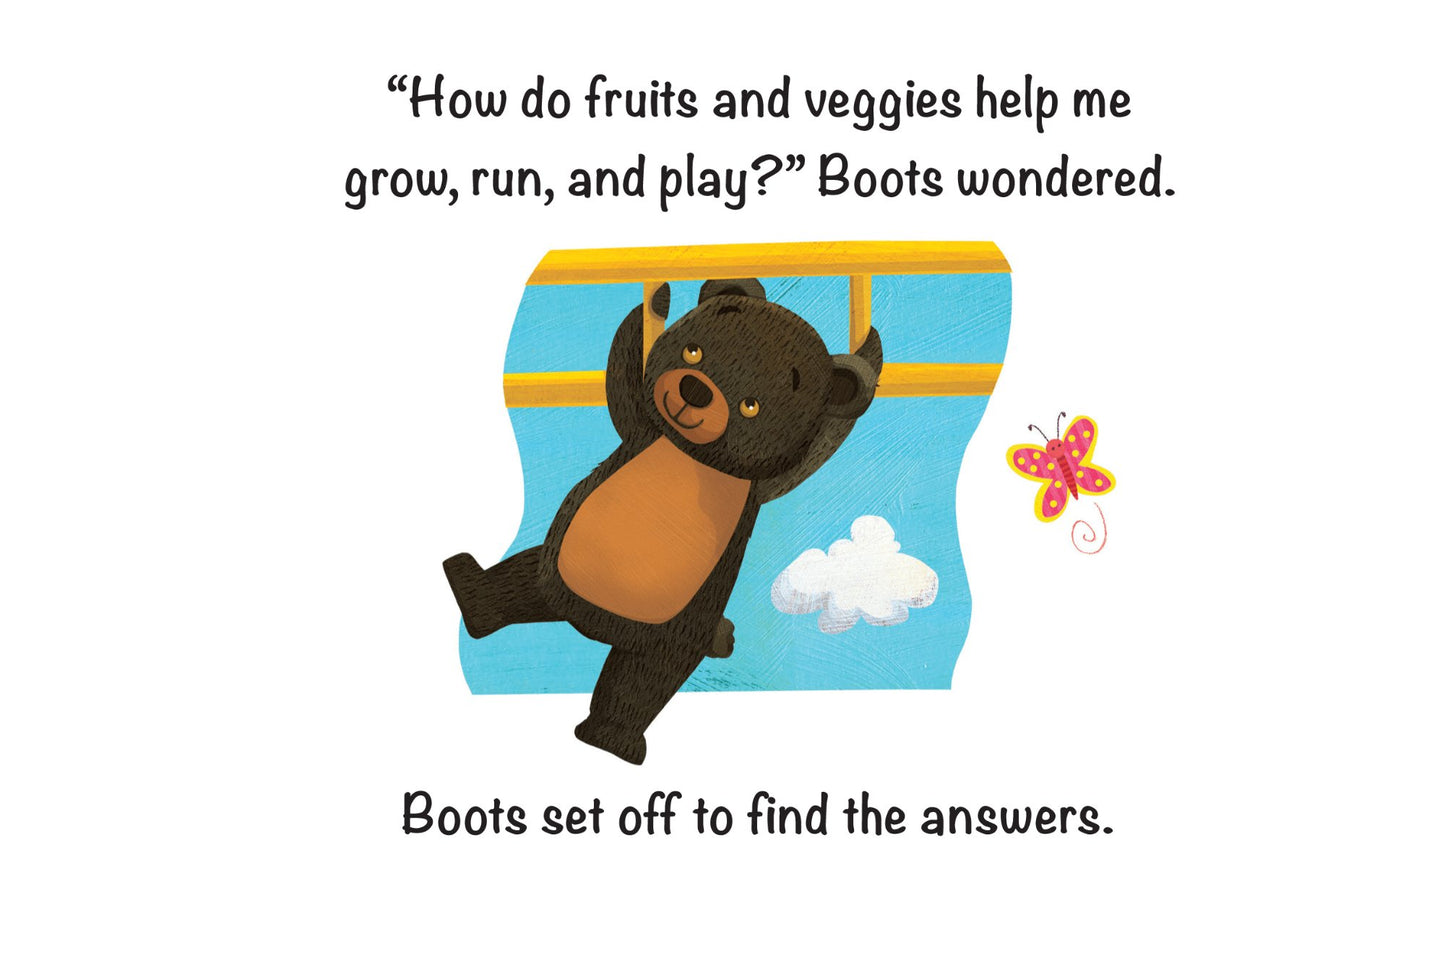 "Hey, Boots the Bear, what do you eat?" - Curious Cub Club